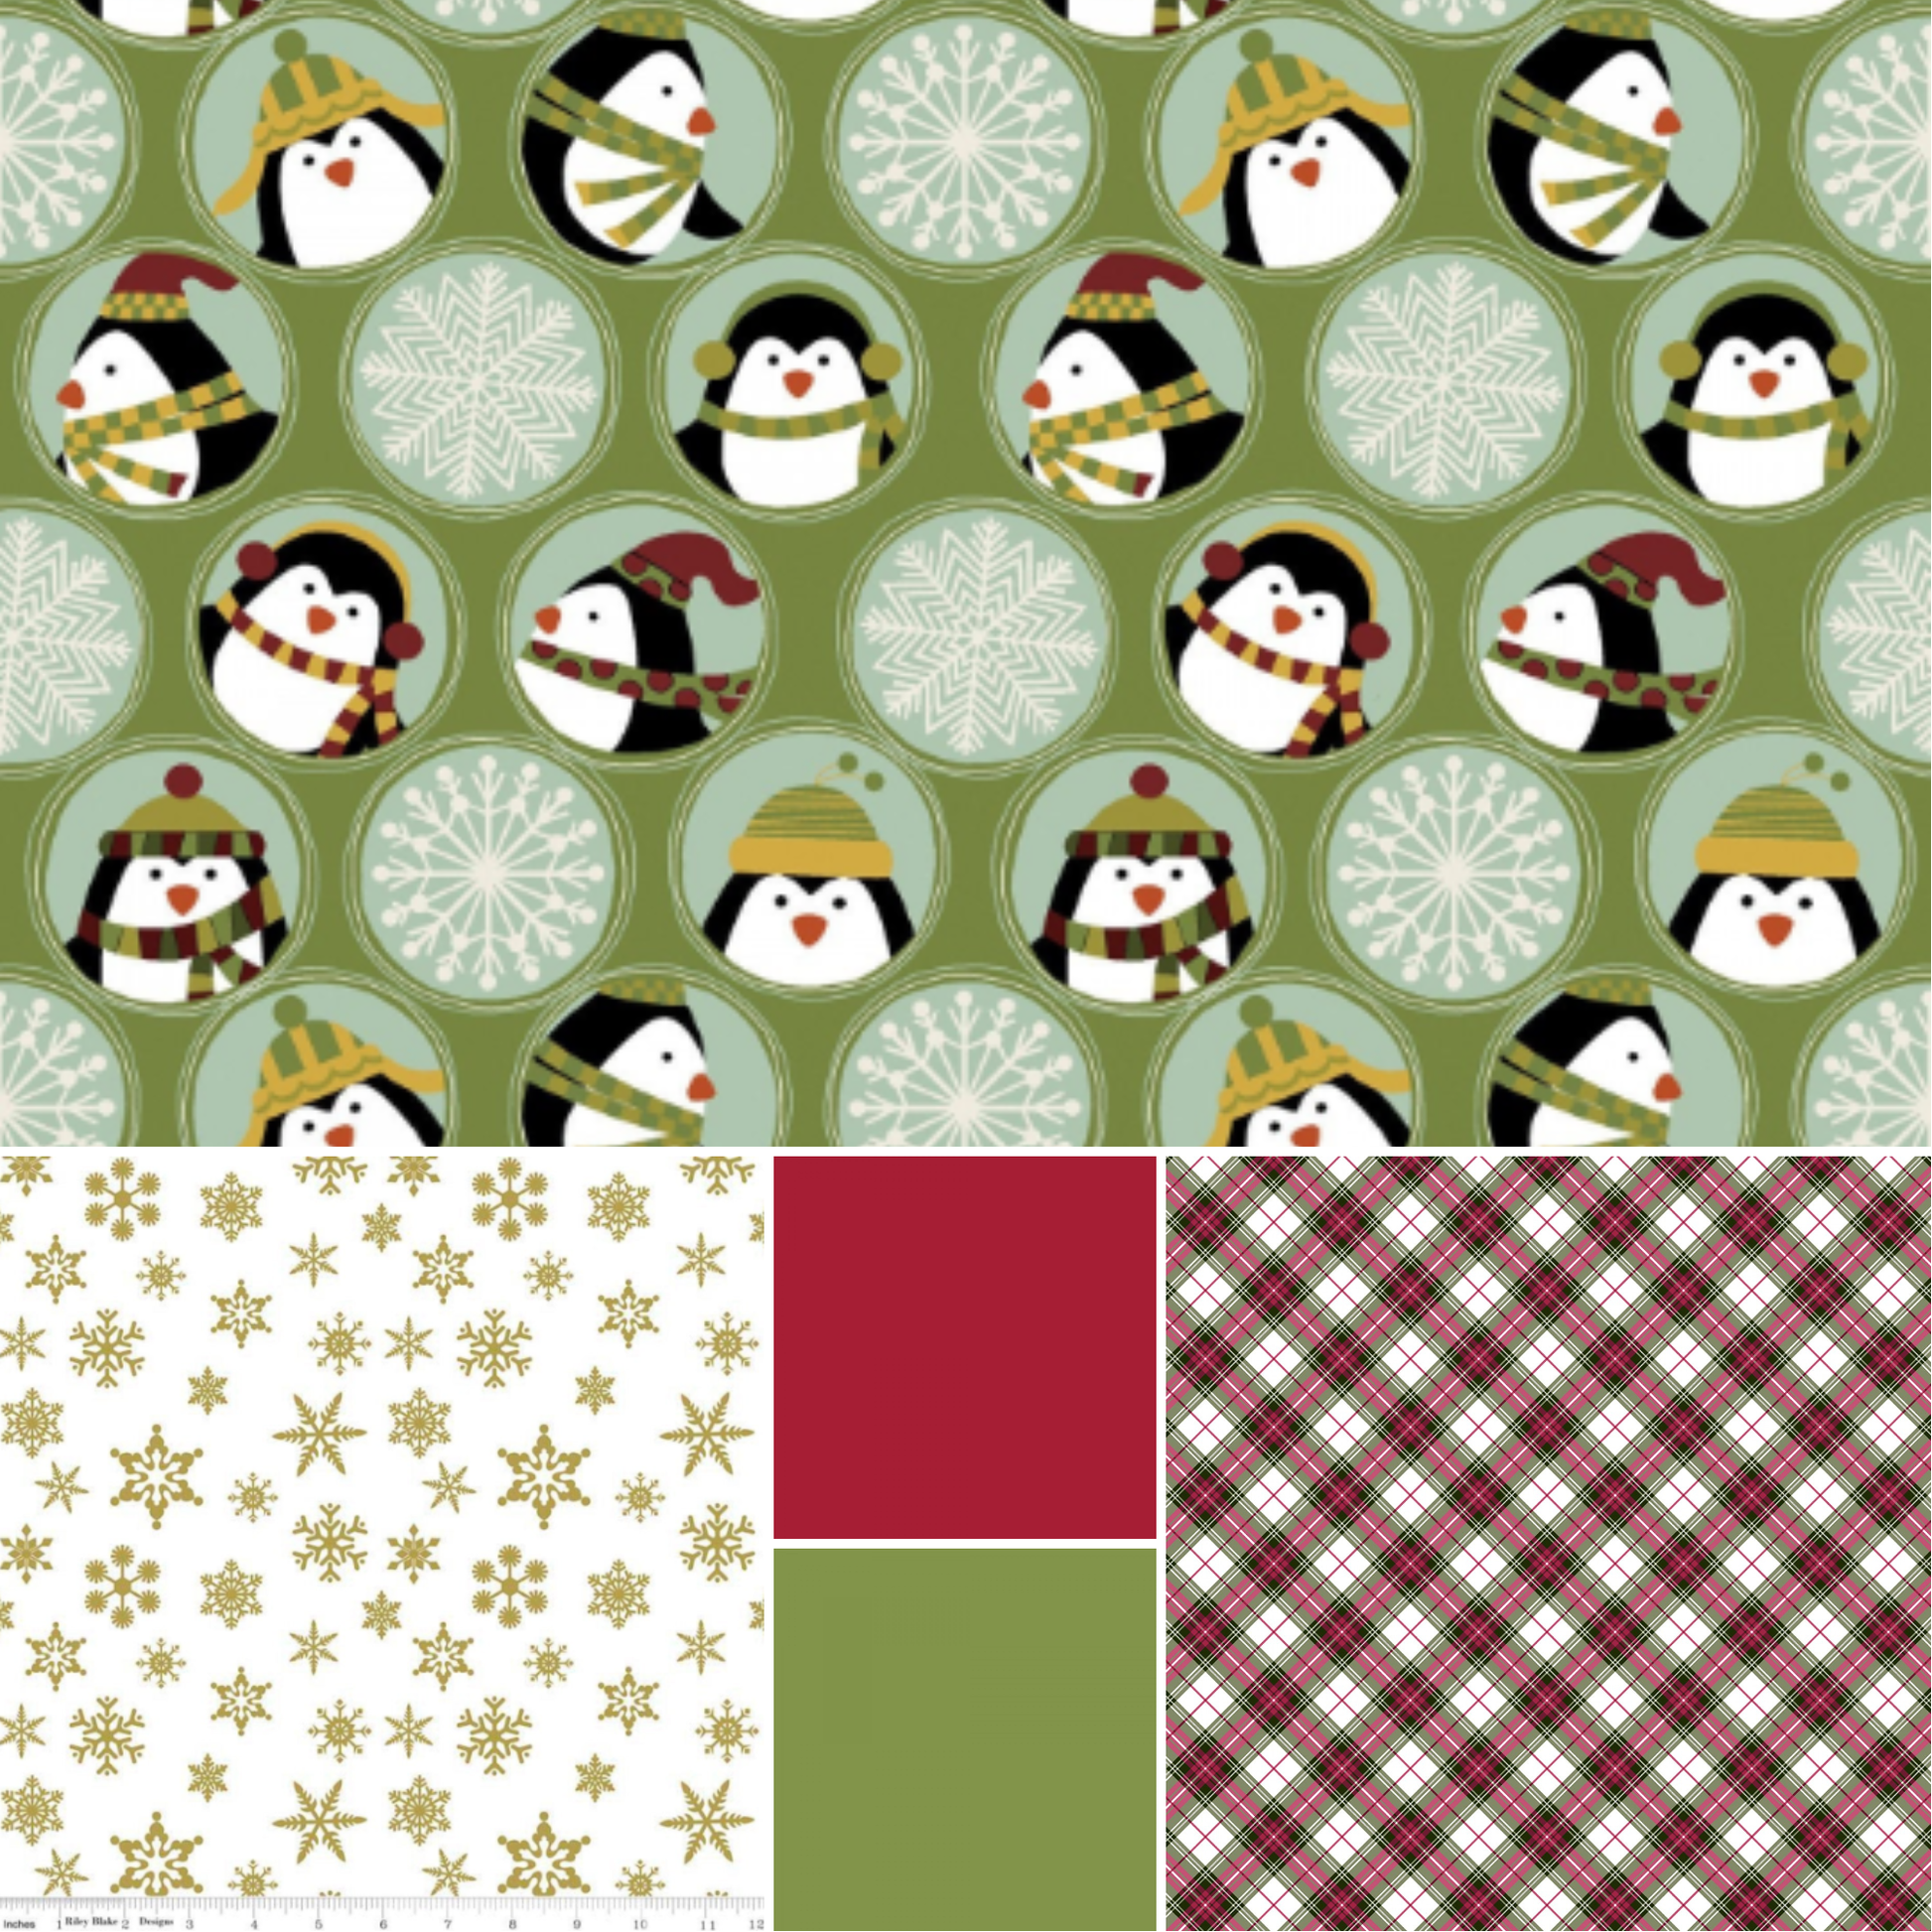 Angels Neverland Fabric FQ BUNDLE-5 fabrics Green Jolly Penguin Fabric Bundle with coordinating fabrics also Sold By The Yard